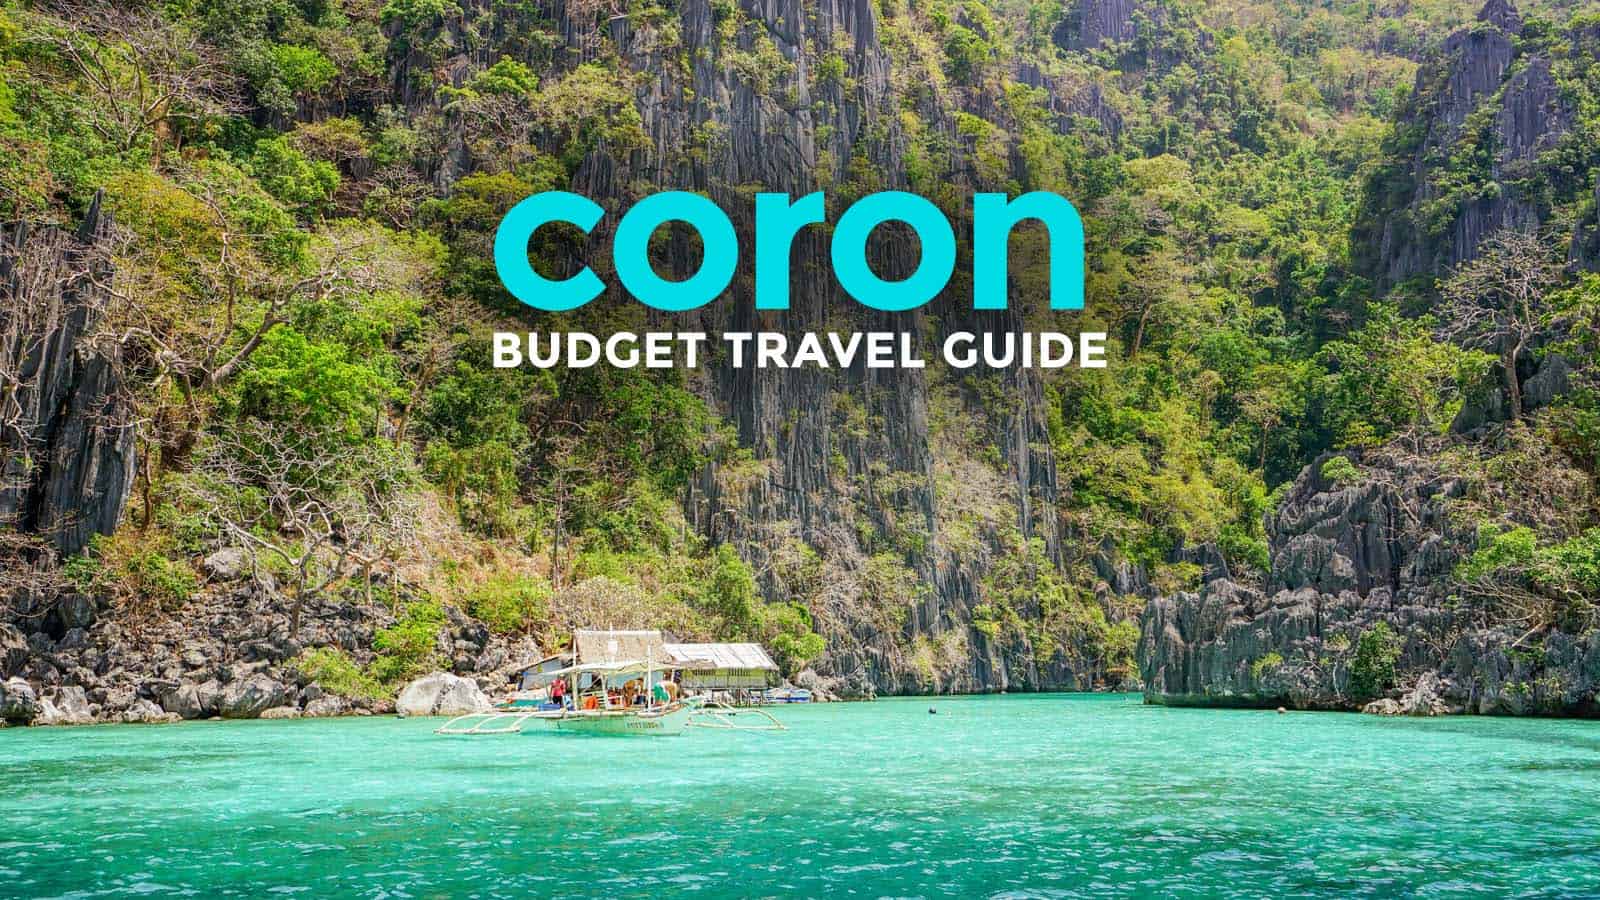 CORON PALAWAN TRAVEL GUIDE with Budget Itinerary